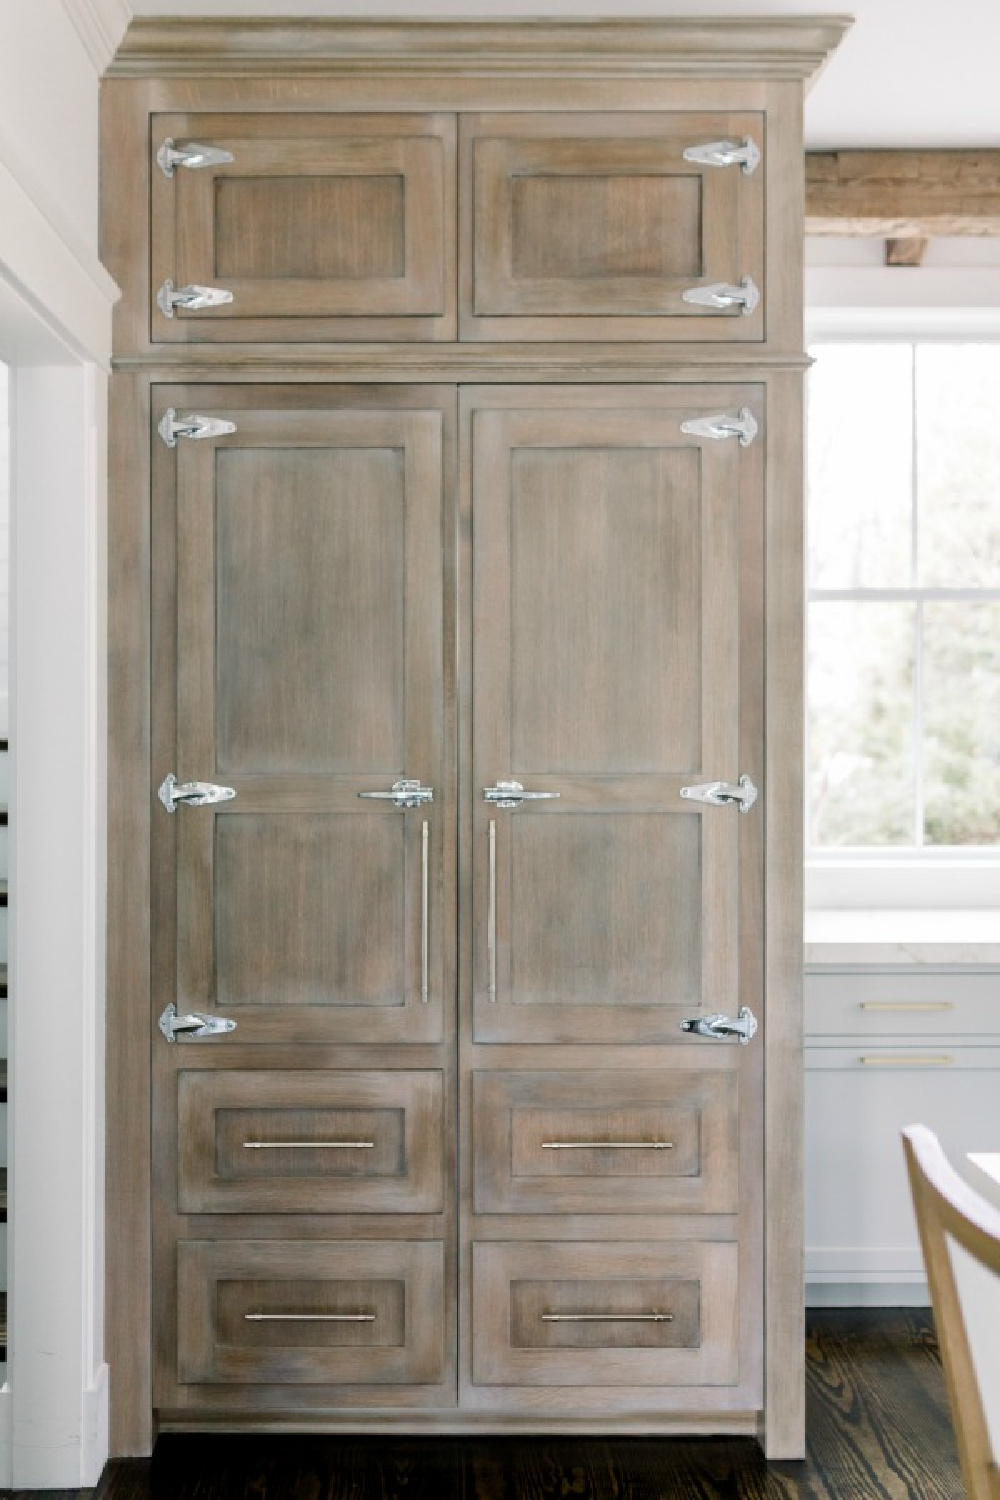 Custom paneled icebox in an elegant white farmhouse kitchen with Benjamin Moore Repose Grey cabinets: Finding Lovely. Wall color: Benjamin Moore Chantilly Lace.